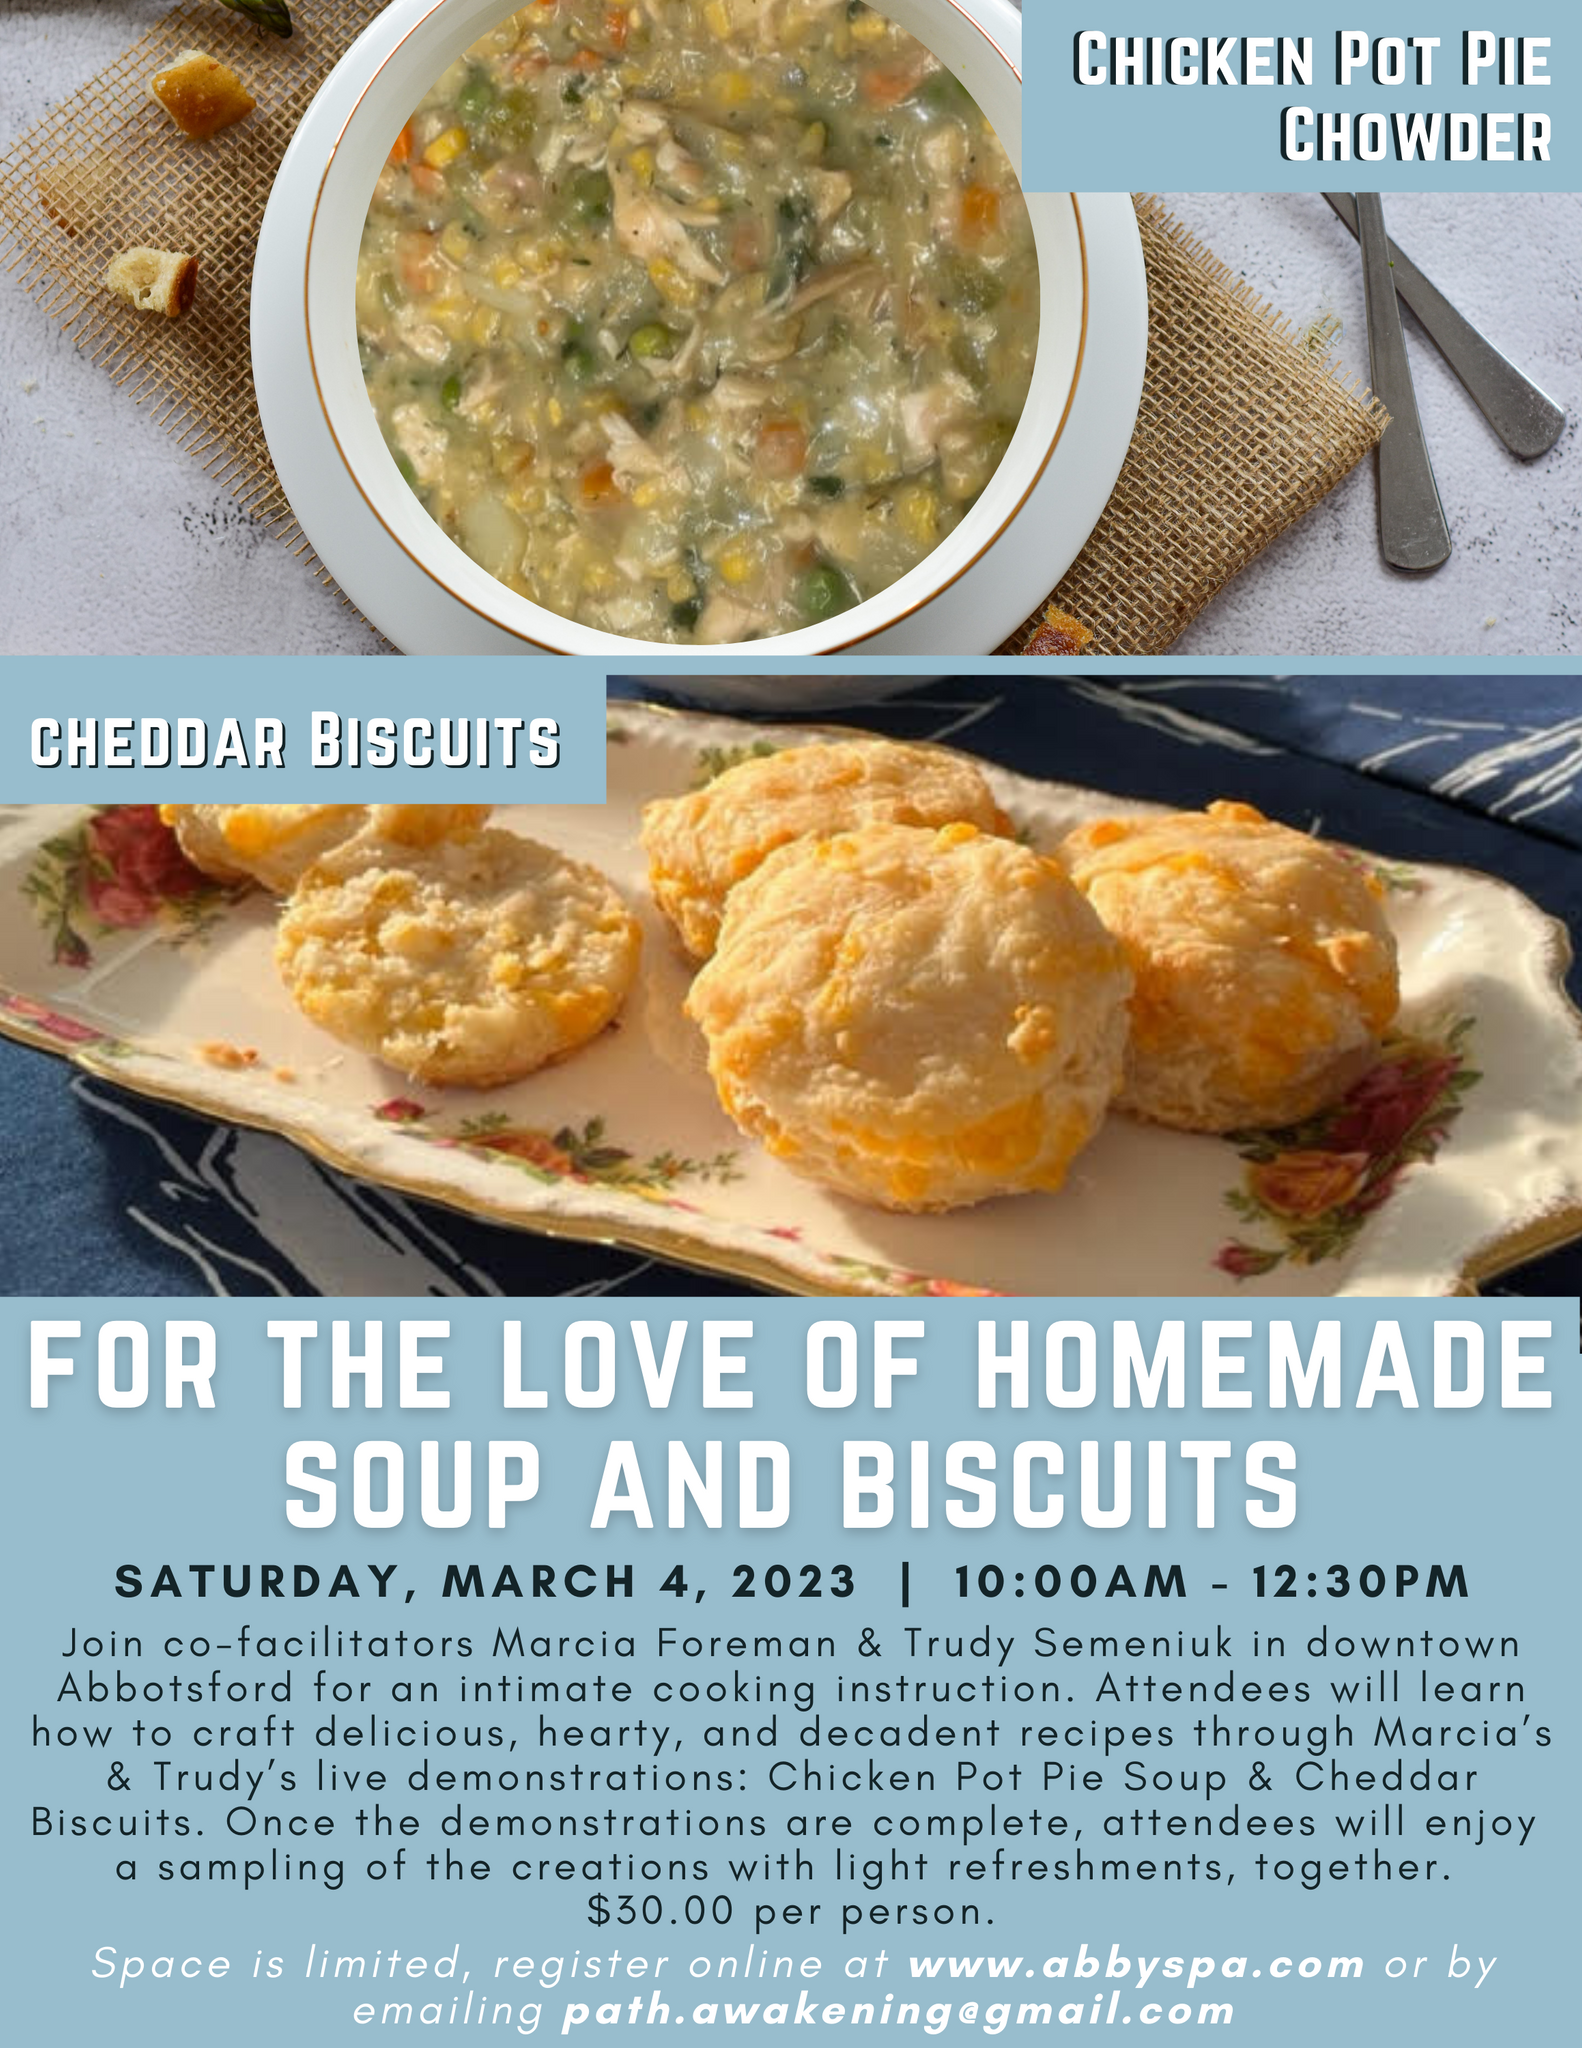 SOLD OUT | For the Love of Homemade Soup AND Biscuits